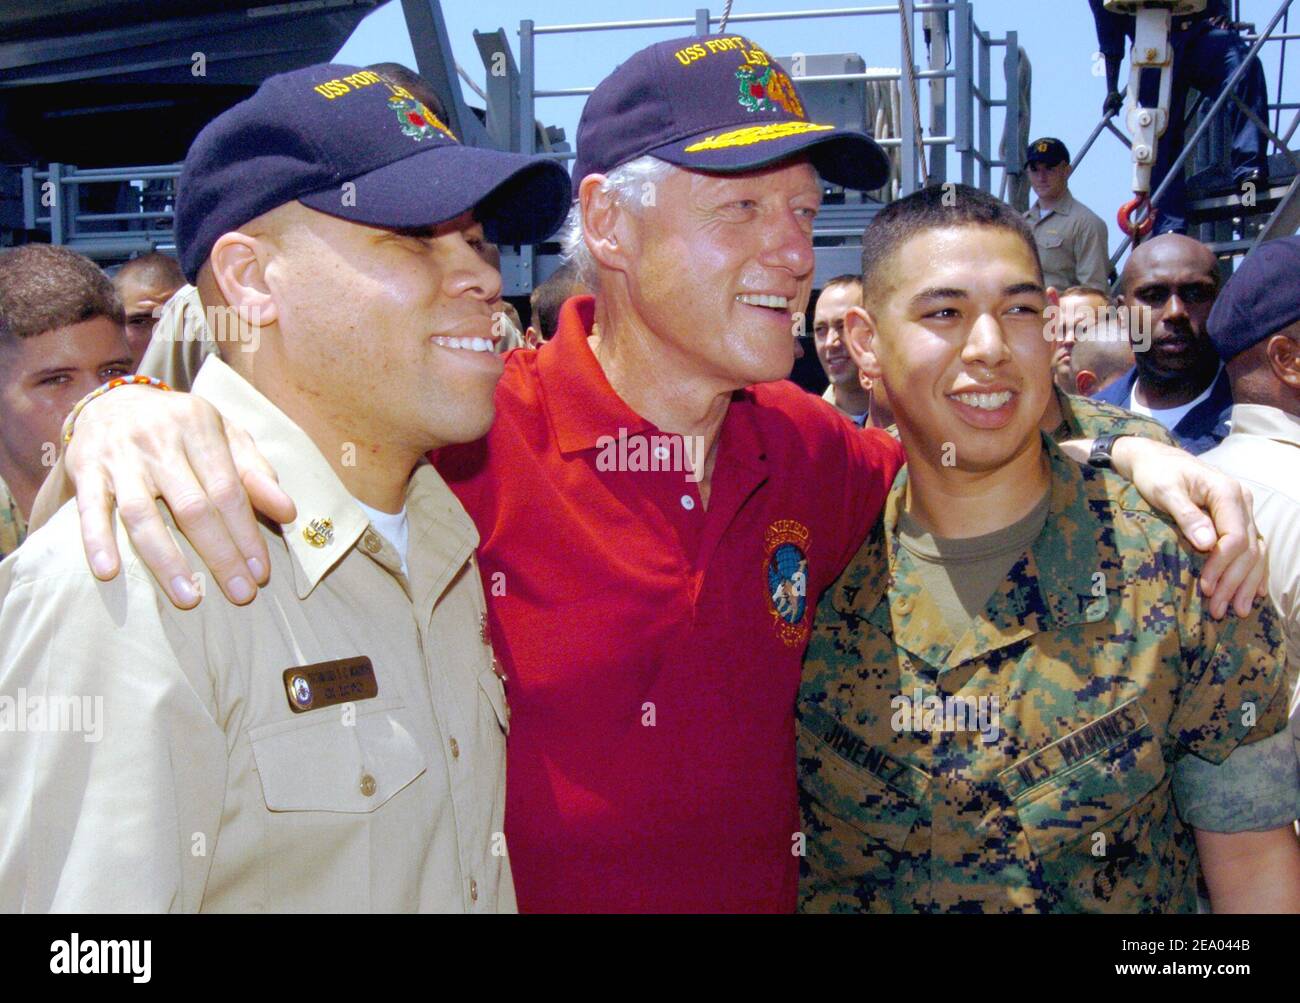 Former President Bill Clinton poses with Chief Operations Specialist David C. McAlister, left, and Lance Cpl. Angelo D. Jimenez aboard the amphibious dock landing ship USS Fort McHenry (LSD 43). Sailors and Marines greeted former President William J. Clinton and George H. W. Bush as they toured Sri Lanka, Thailand and Indonesia to see first hand, the effects the tsunami had on Southeast Asia on February 20, 2005. Photo Michael D. Kennedy/USN via ABACA. Stock Photo